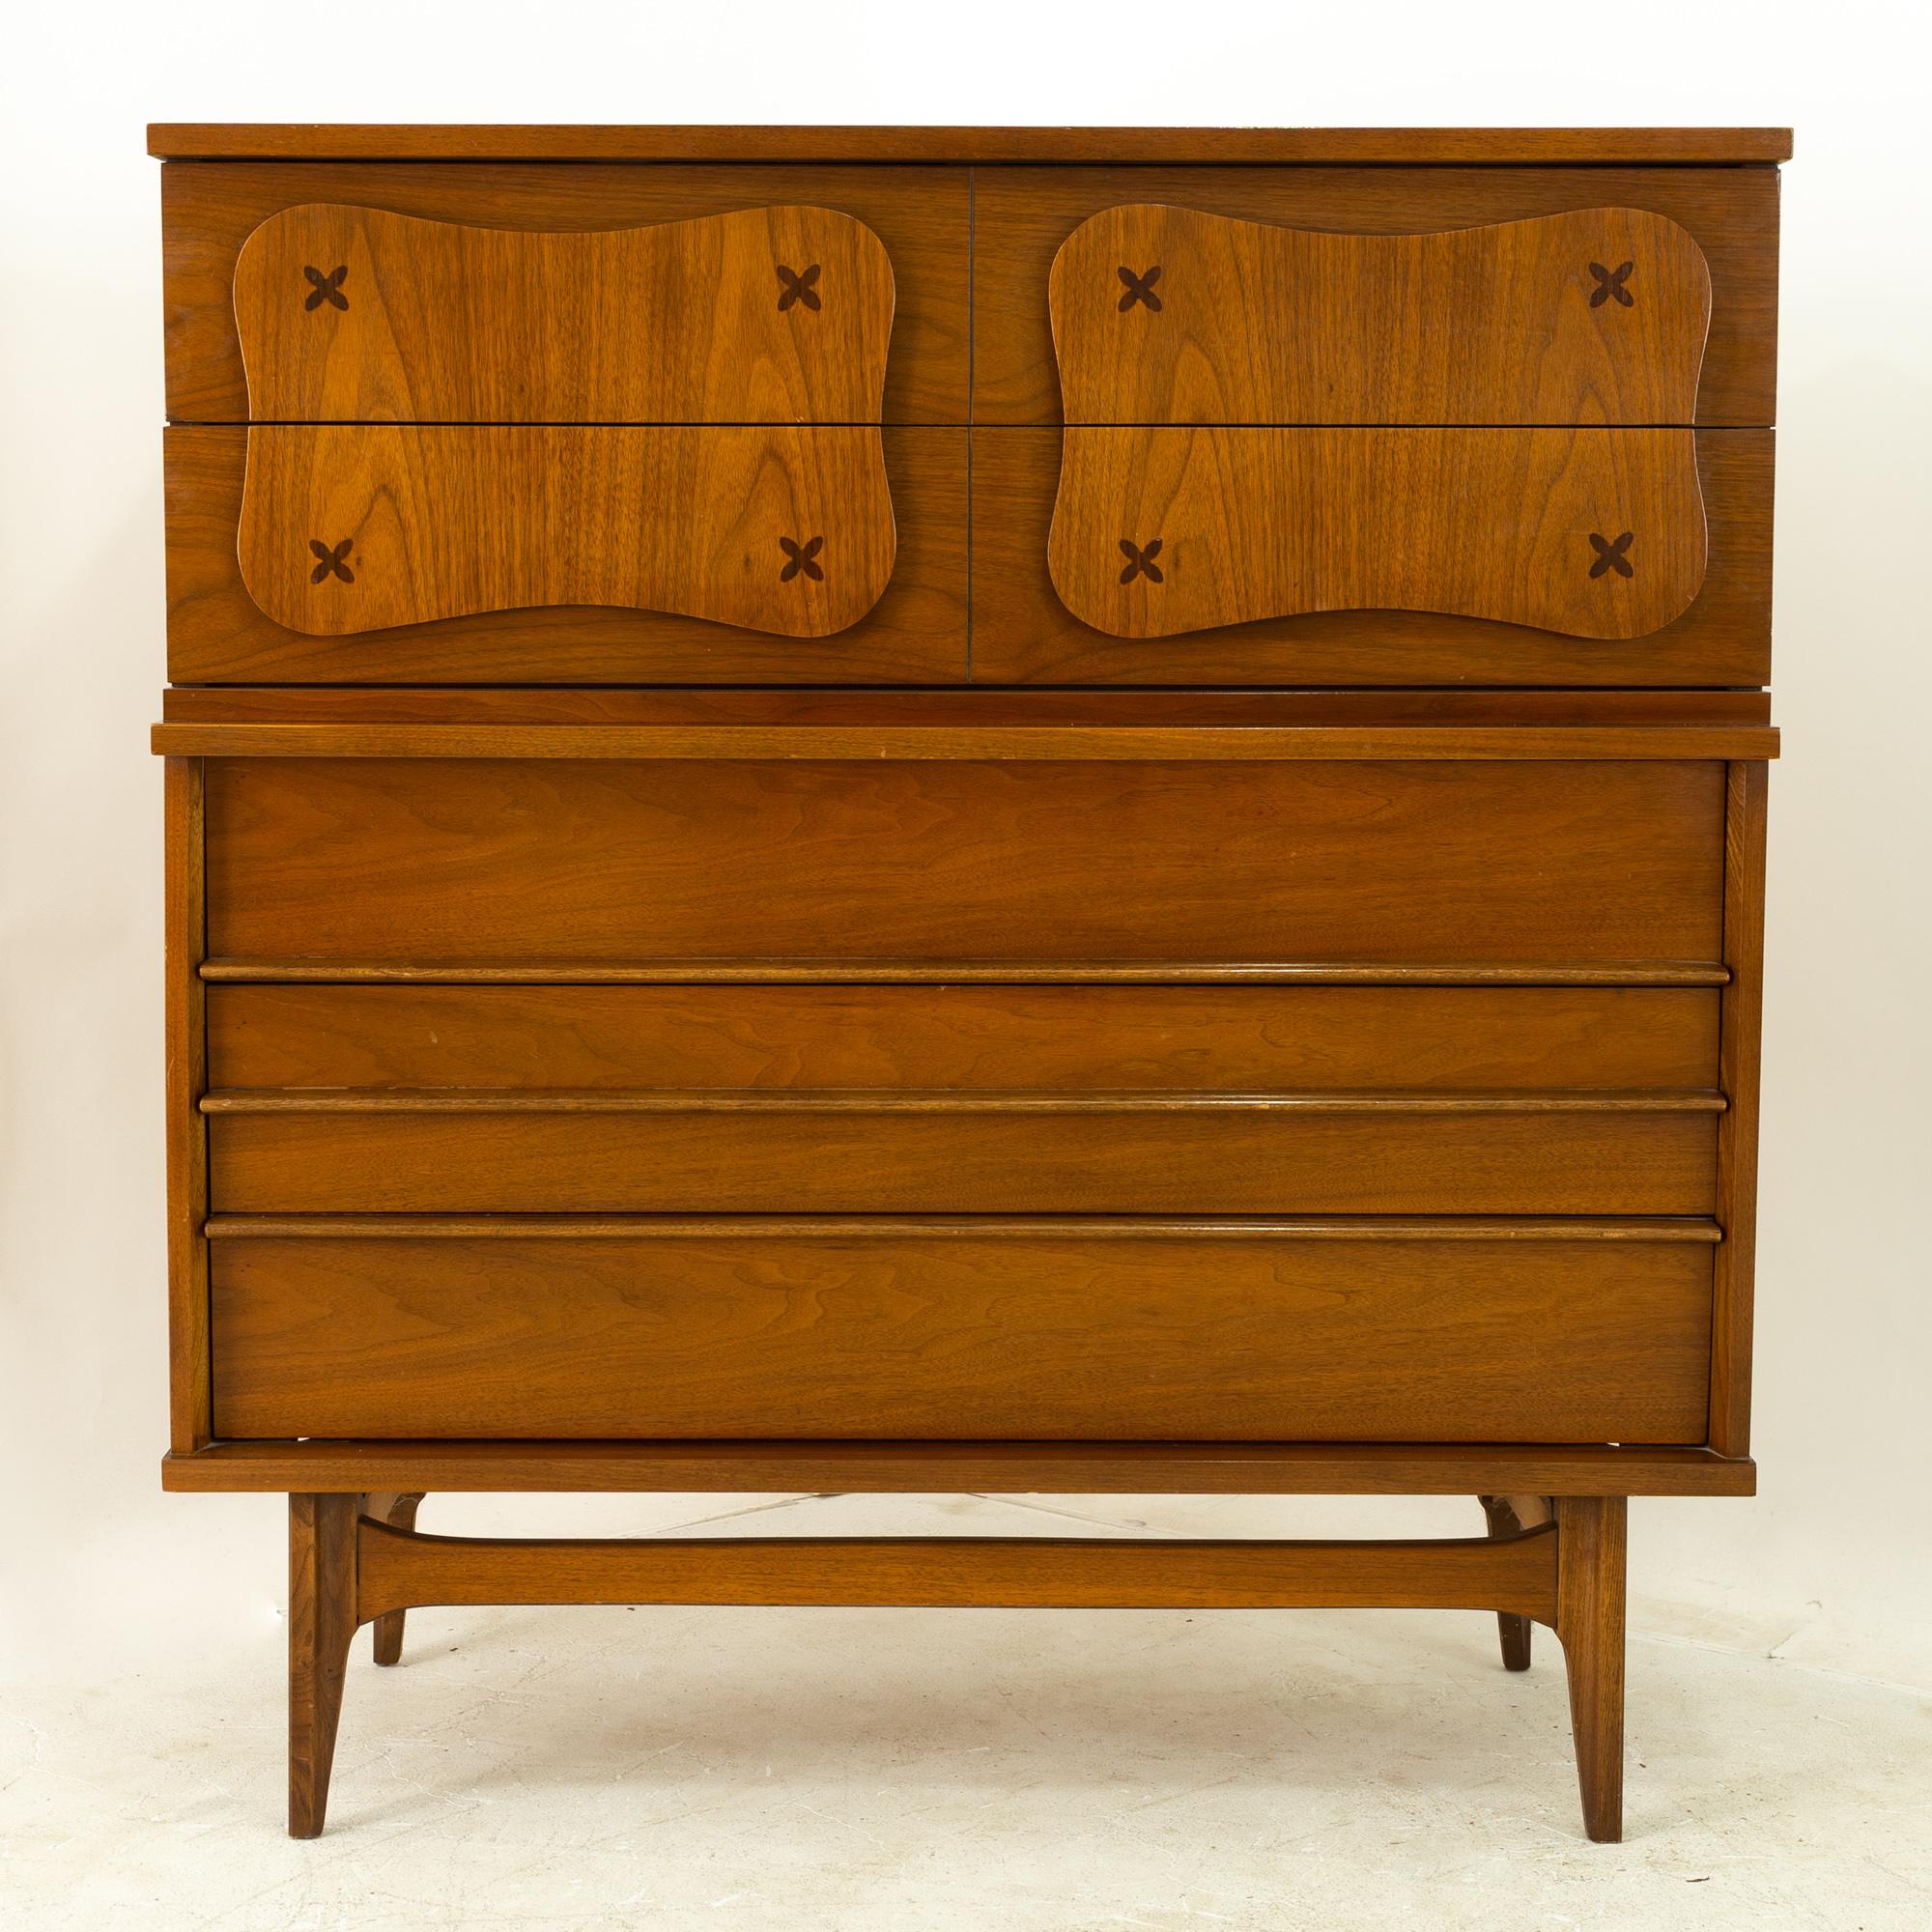 Merton Gershun for American of Martinsville style Bassett Mid Century 5-drawer highboy dresser 
Measures: 42 wide x 17.75 deep x 45.25 high.

This price includes getting this piece in what we call restored vintage condition. That means the piece is